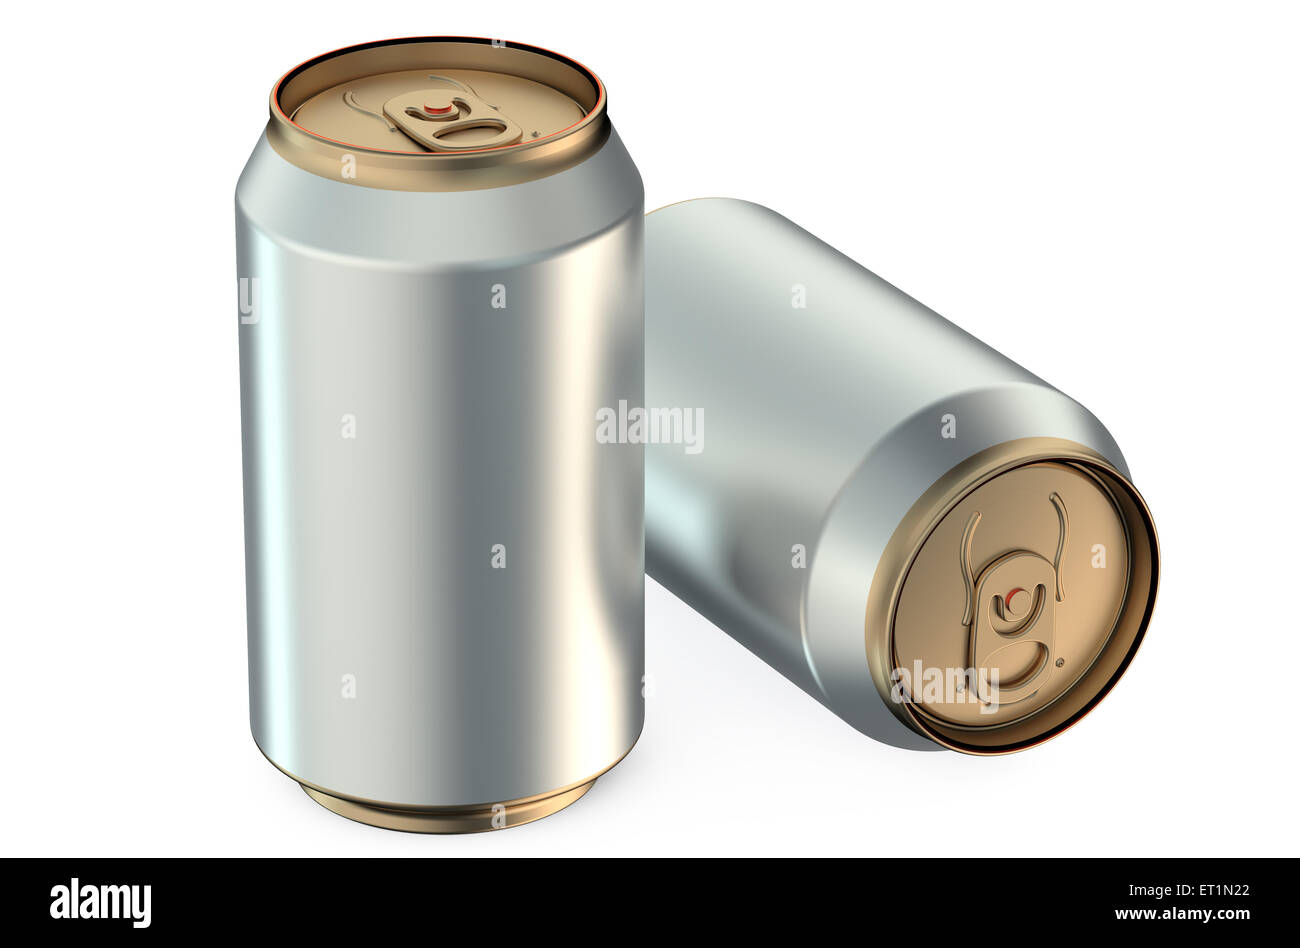 two metallic beer cans isolated on white background Stock Photo